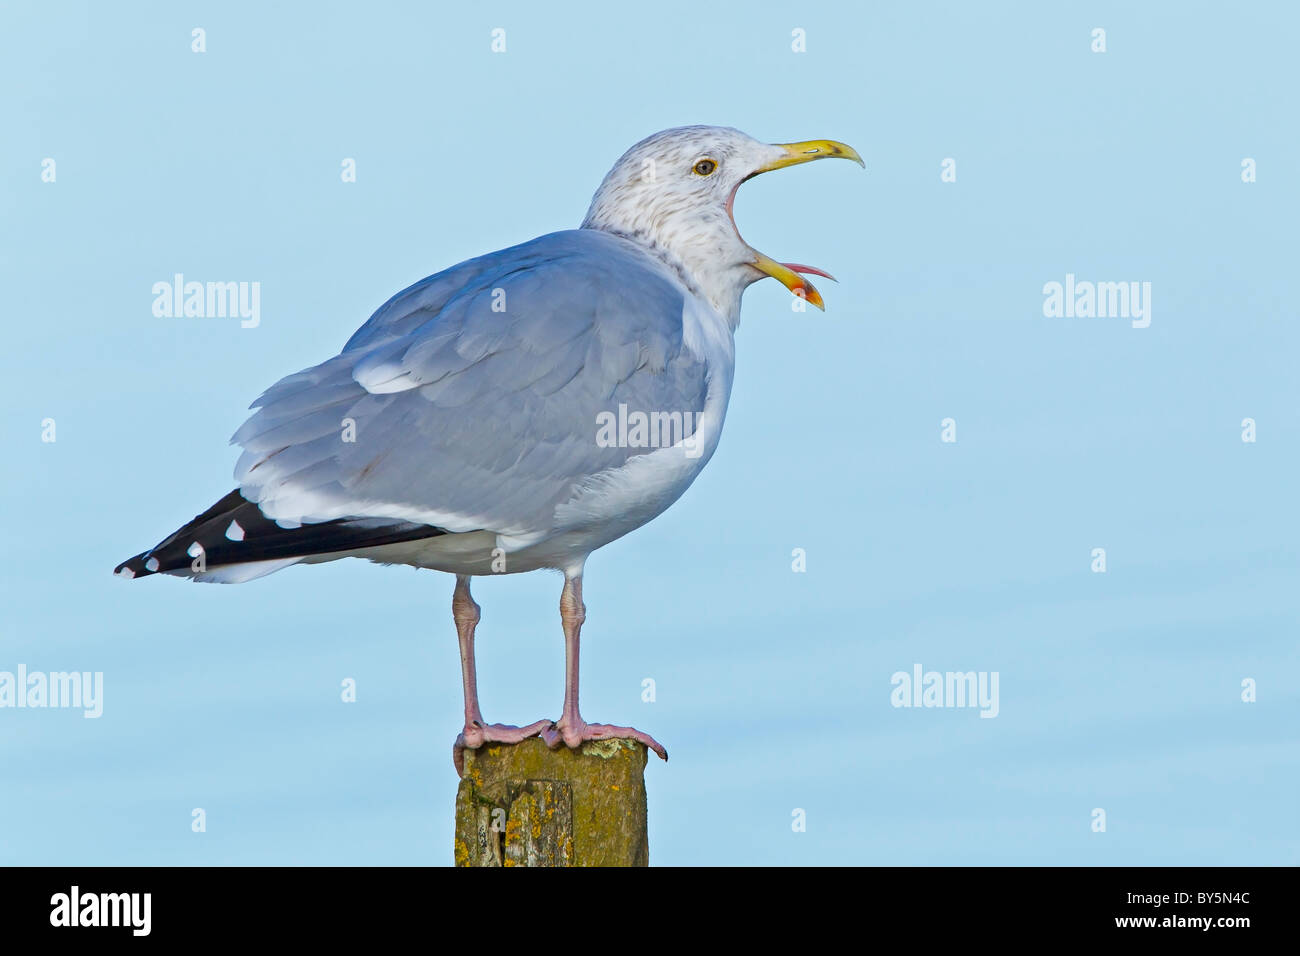 HERRING GULL STANDING ON A POST YAWNING Stock Photo